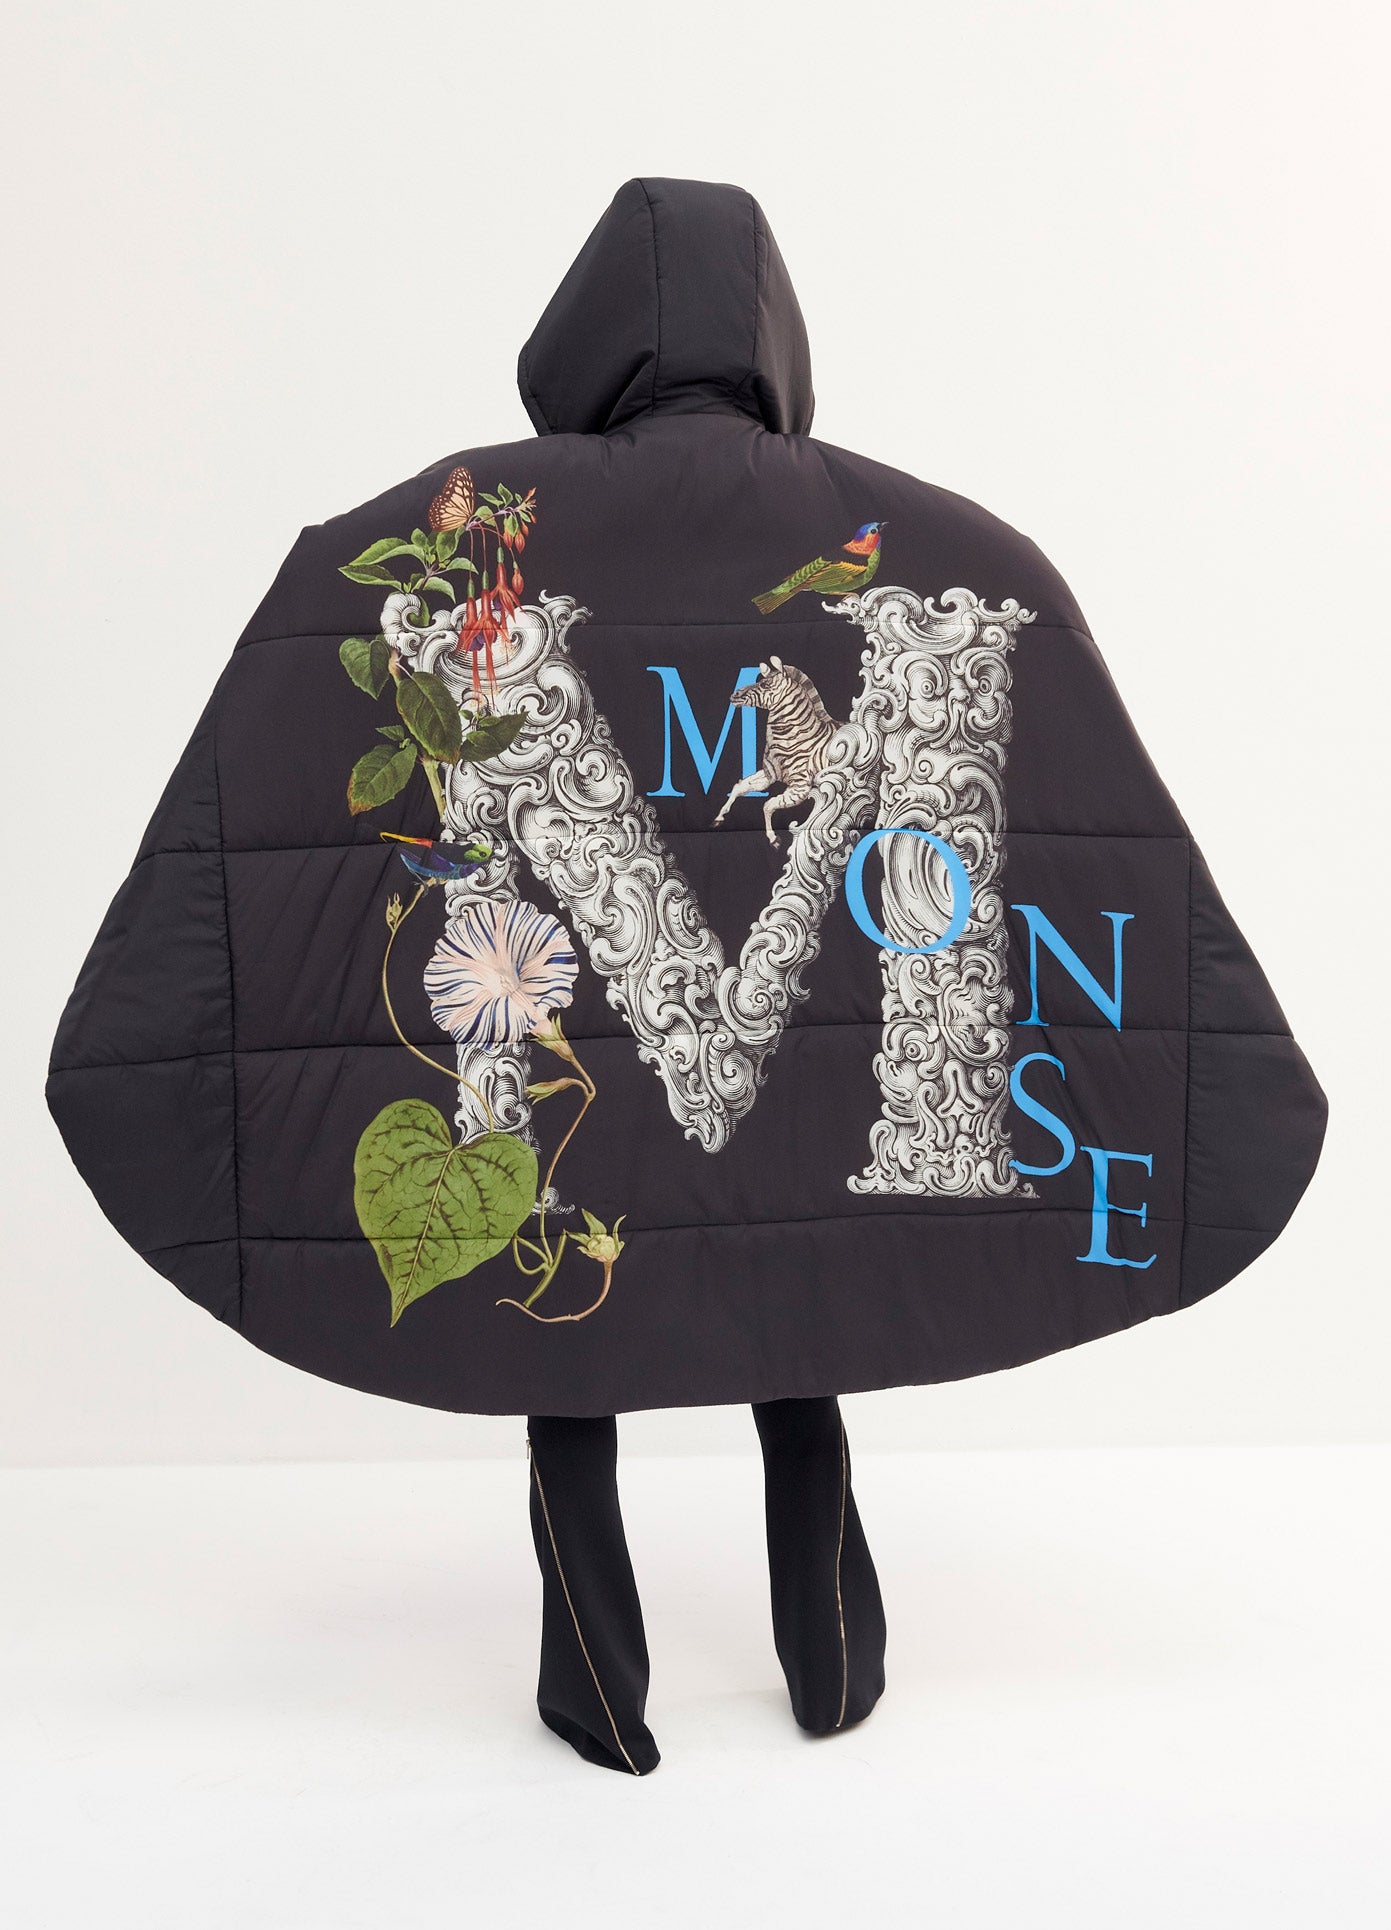 MONSE M Print Quilted Coat in Black M Print on Model Full Print Back View